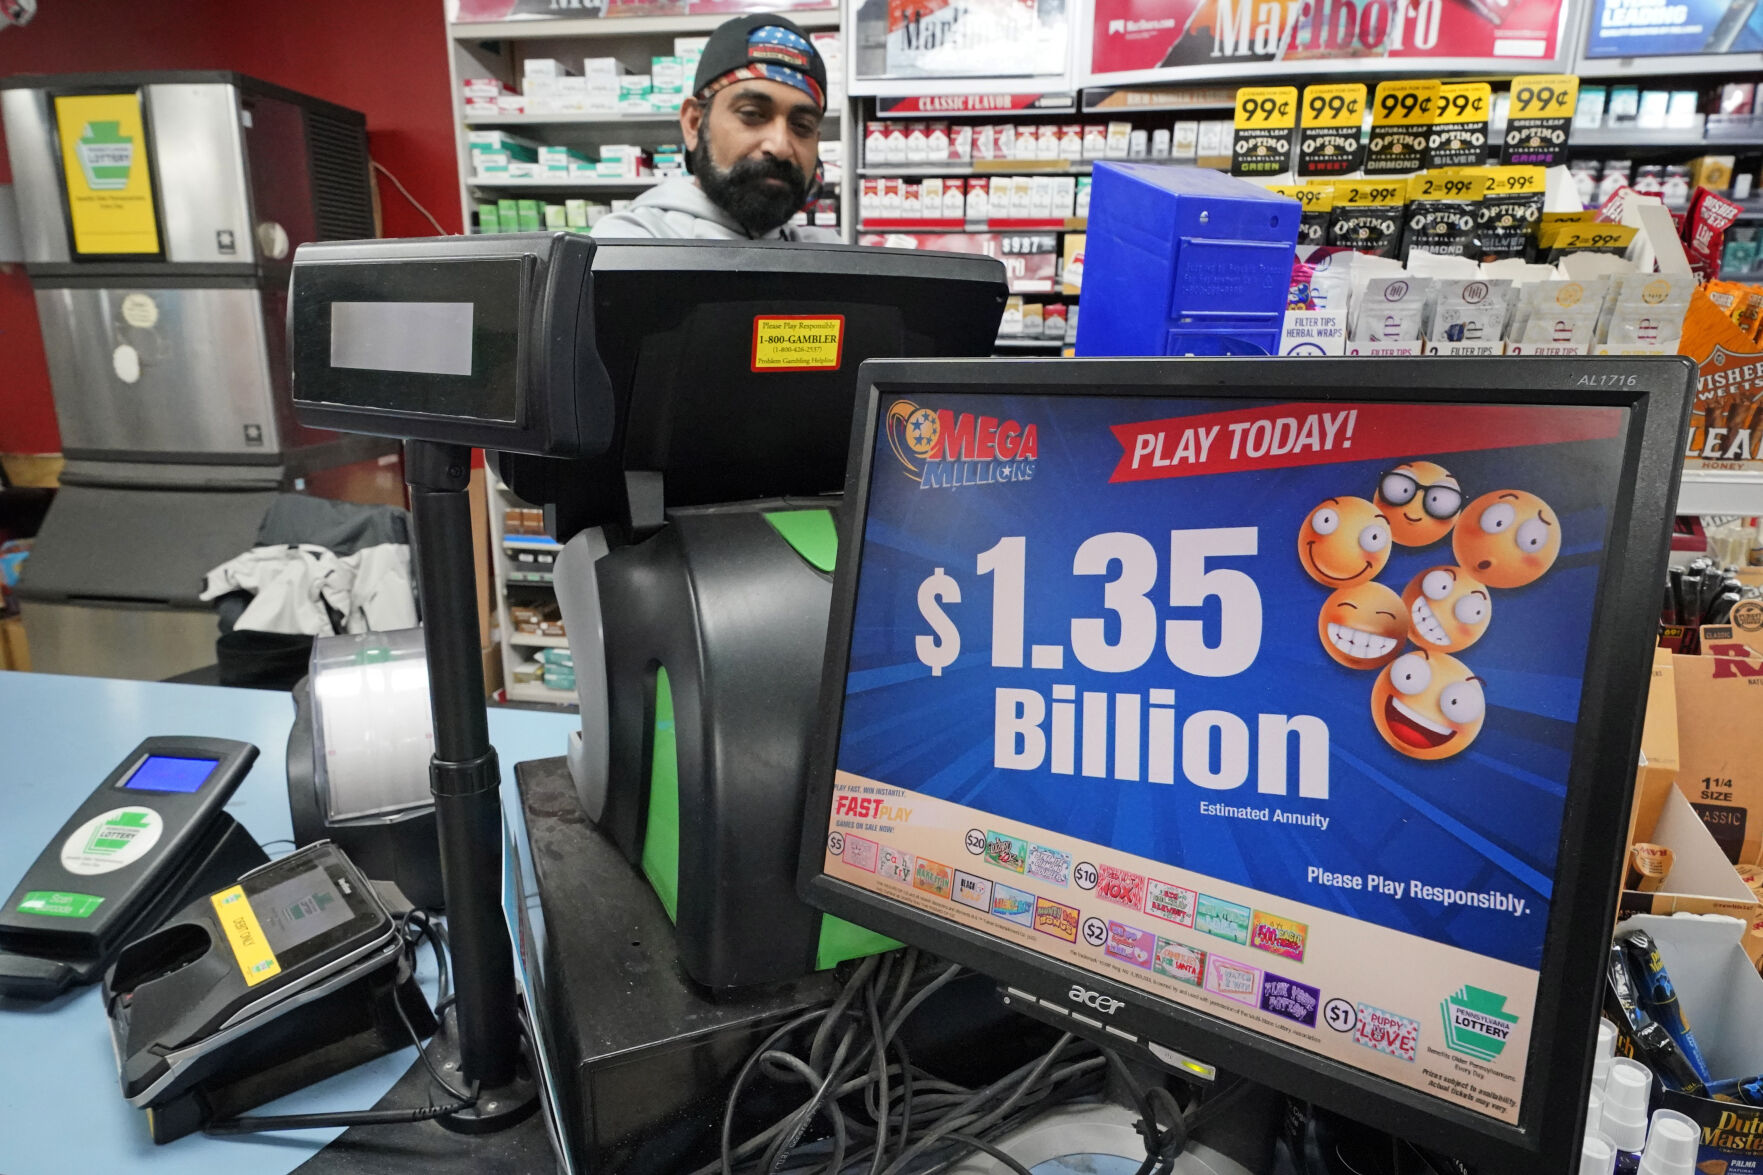 <p>FILE - A Mega Million sign displays the estimated jackpot of $1.35 Billion at the Cranberry Super Mini Mart in Cranberry, Pa., Jan. 12, 2023. The winner of a $1.35 billion Mega Millions jackpot has come forward to collect the prize. The Maine State Lottery announced Wednesday, Feb. 22, that the winner chose to remain anonymous and collect the cash option through a limited liability company instead of receiving the full amount in payments over time. (AP Photo/Gene J. Puskar, File)</p>   PHOTO CREDIT: Gene J. Puskar 